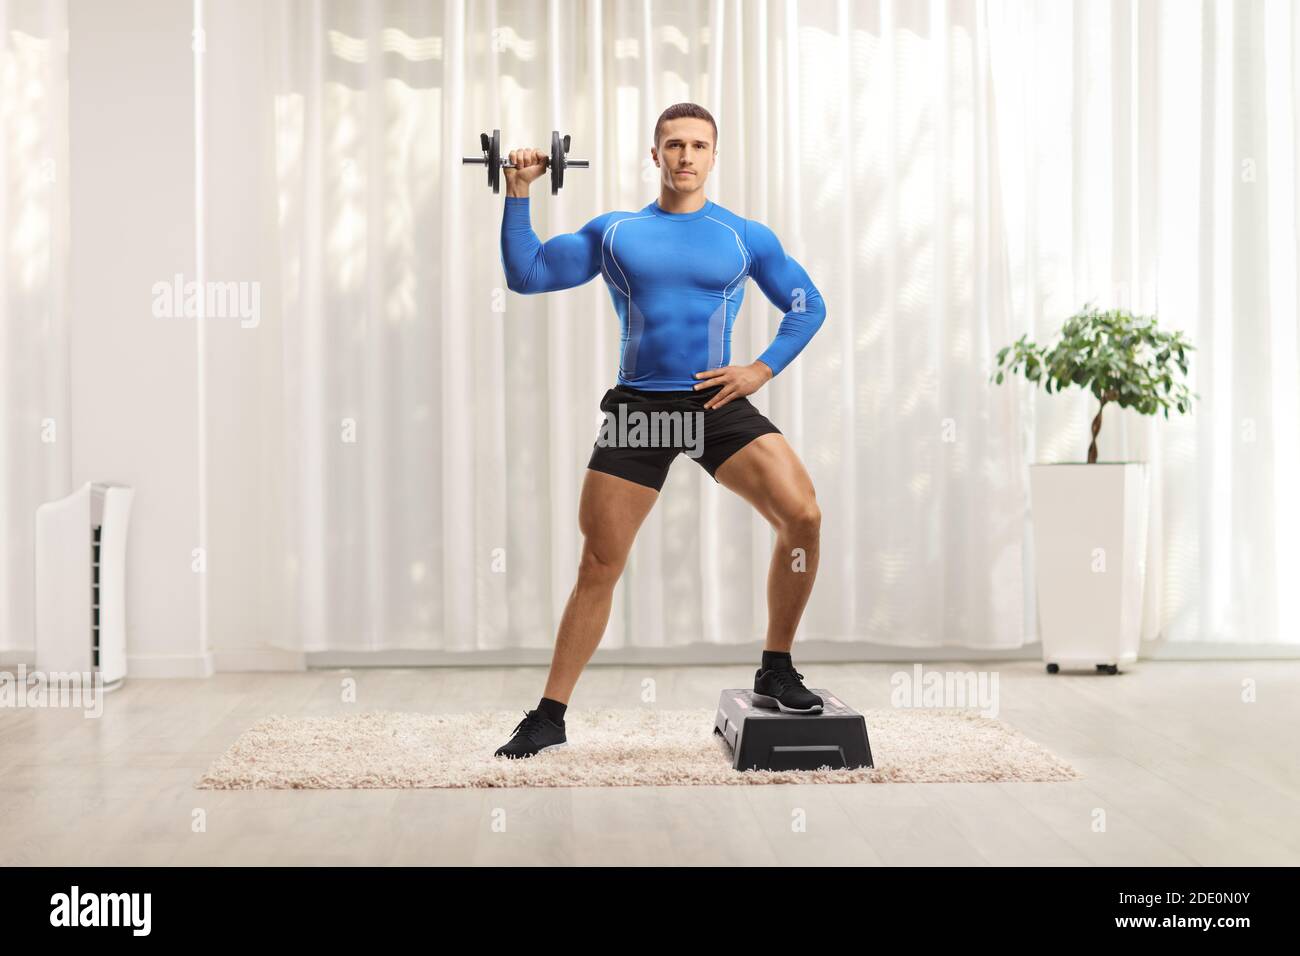 Bodybuilder exercising aerobic on a stepper and holding weights at home Stock Photo